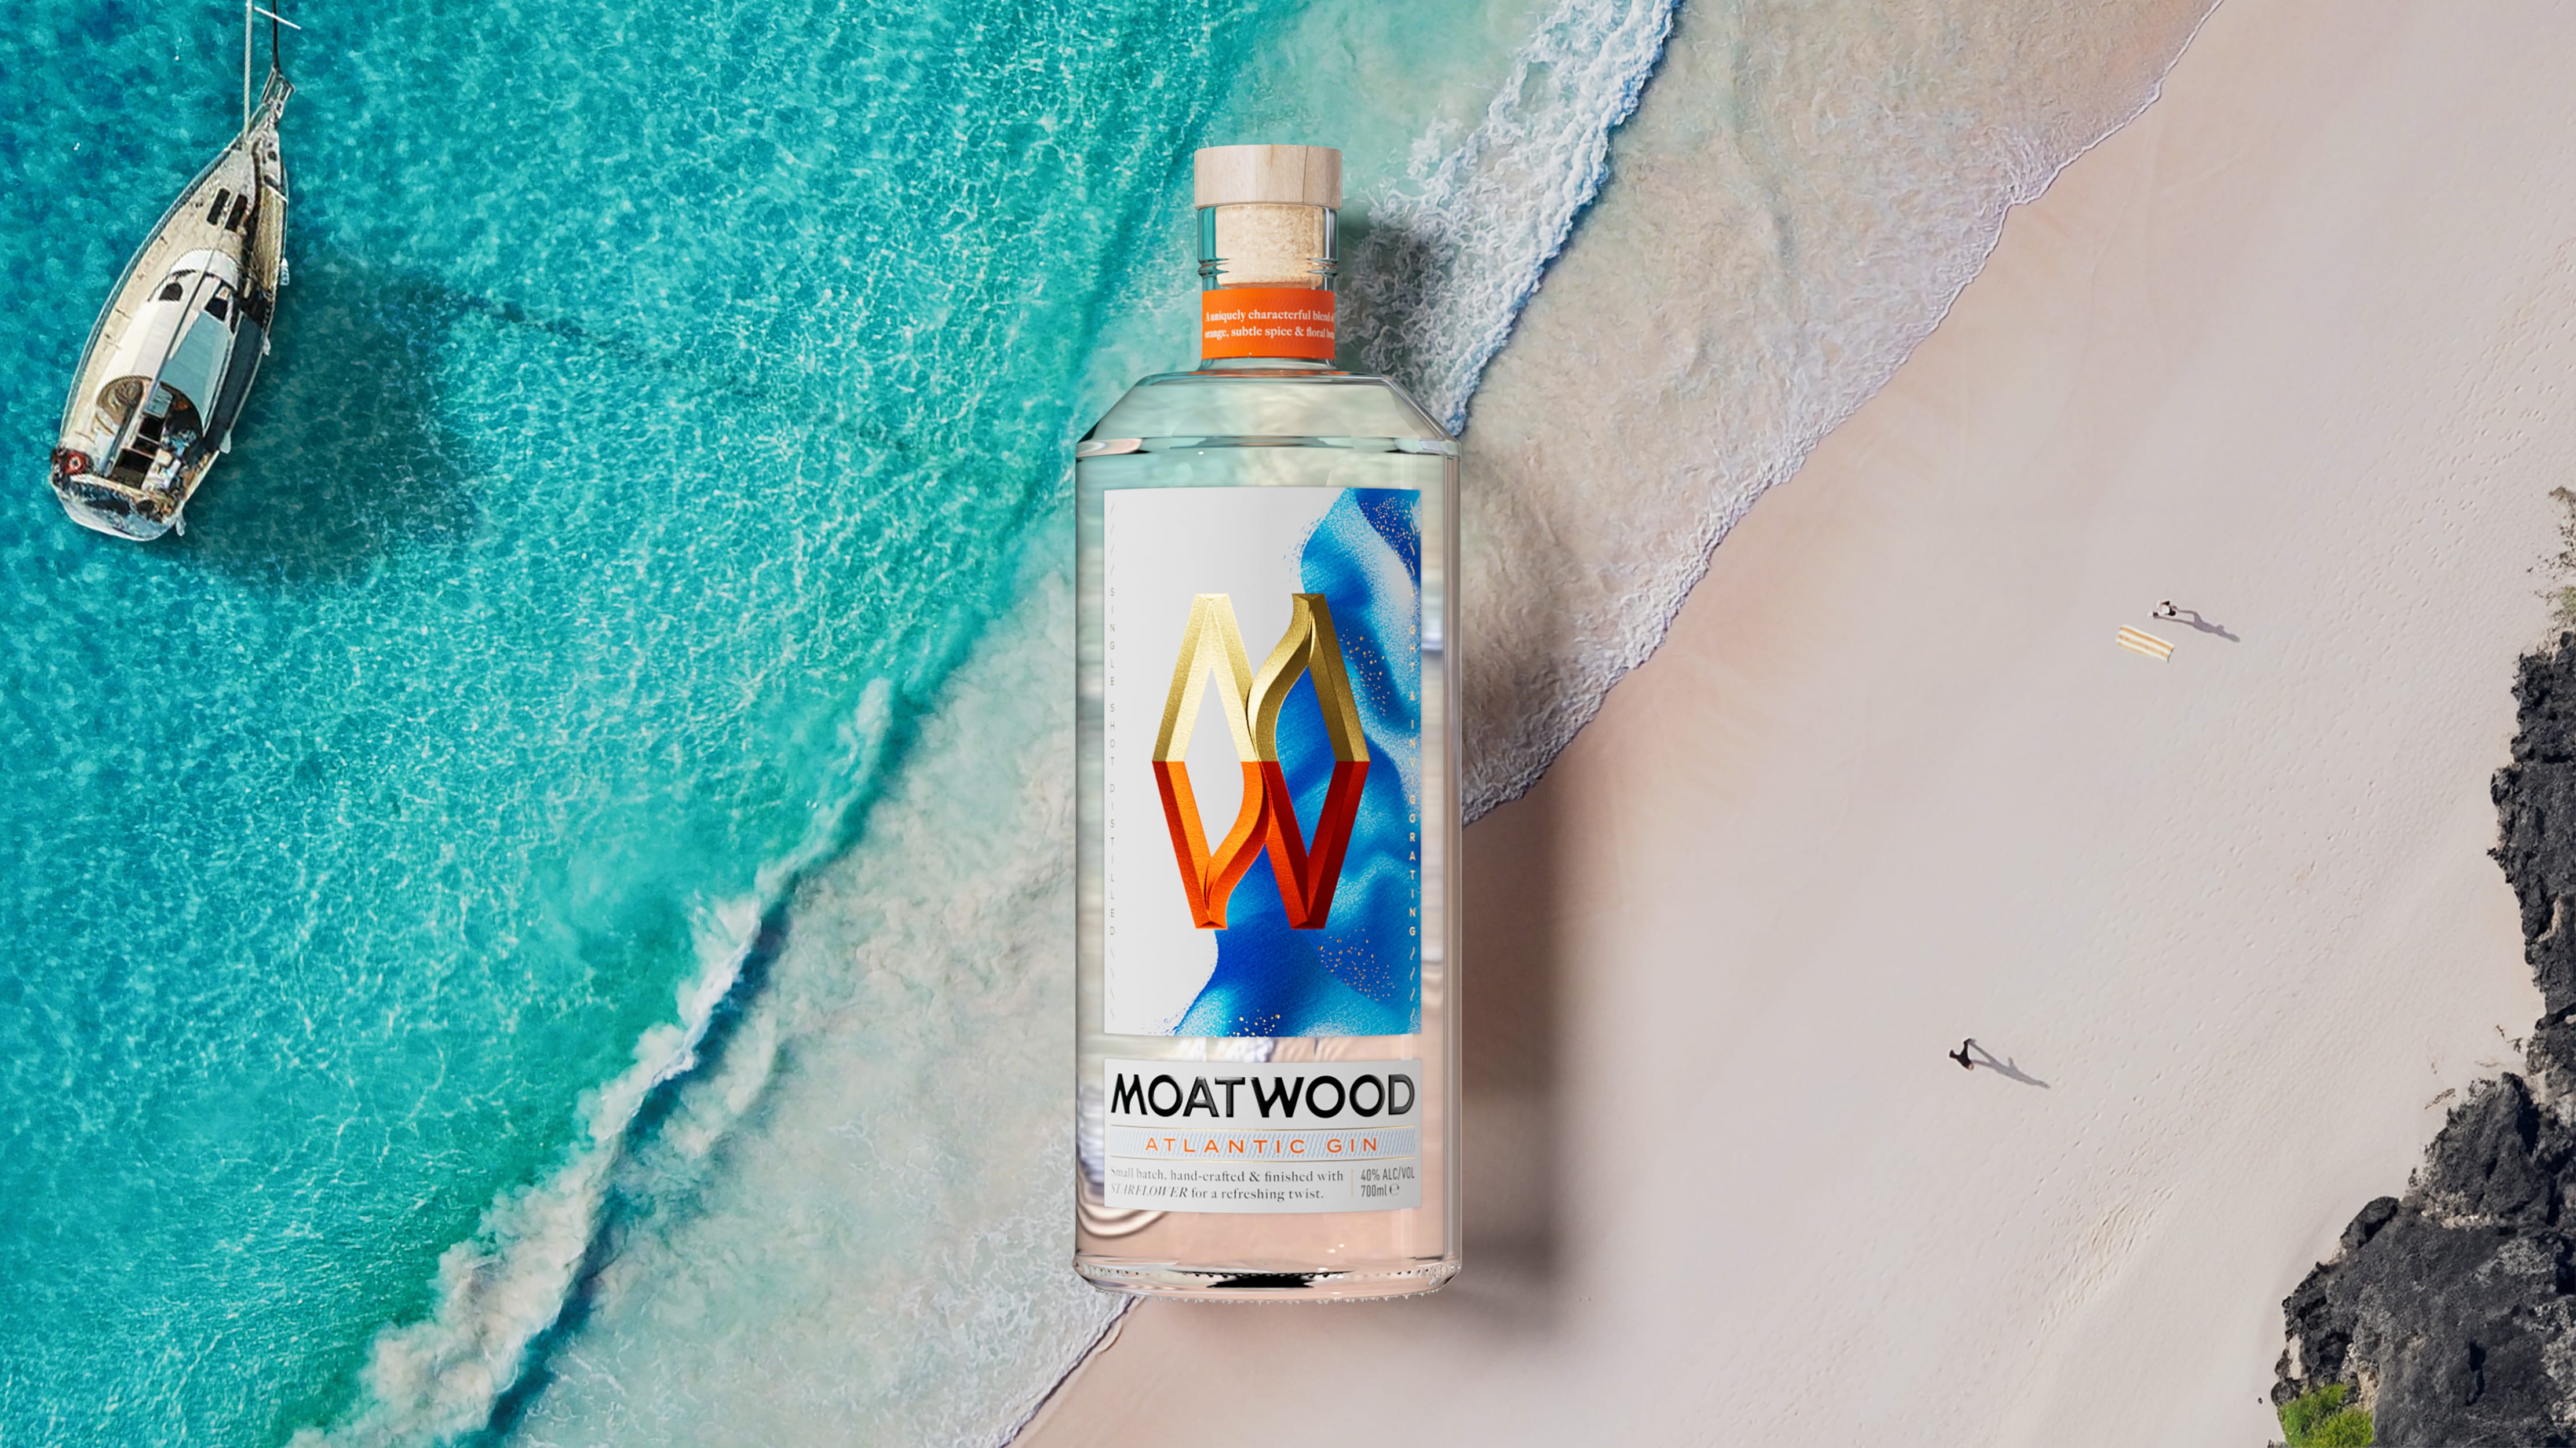 The Cabinet Designed the Brand and Packaging Design for Moatwood Gin